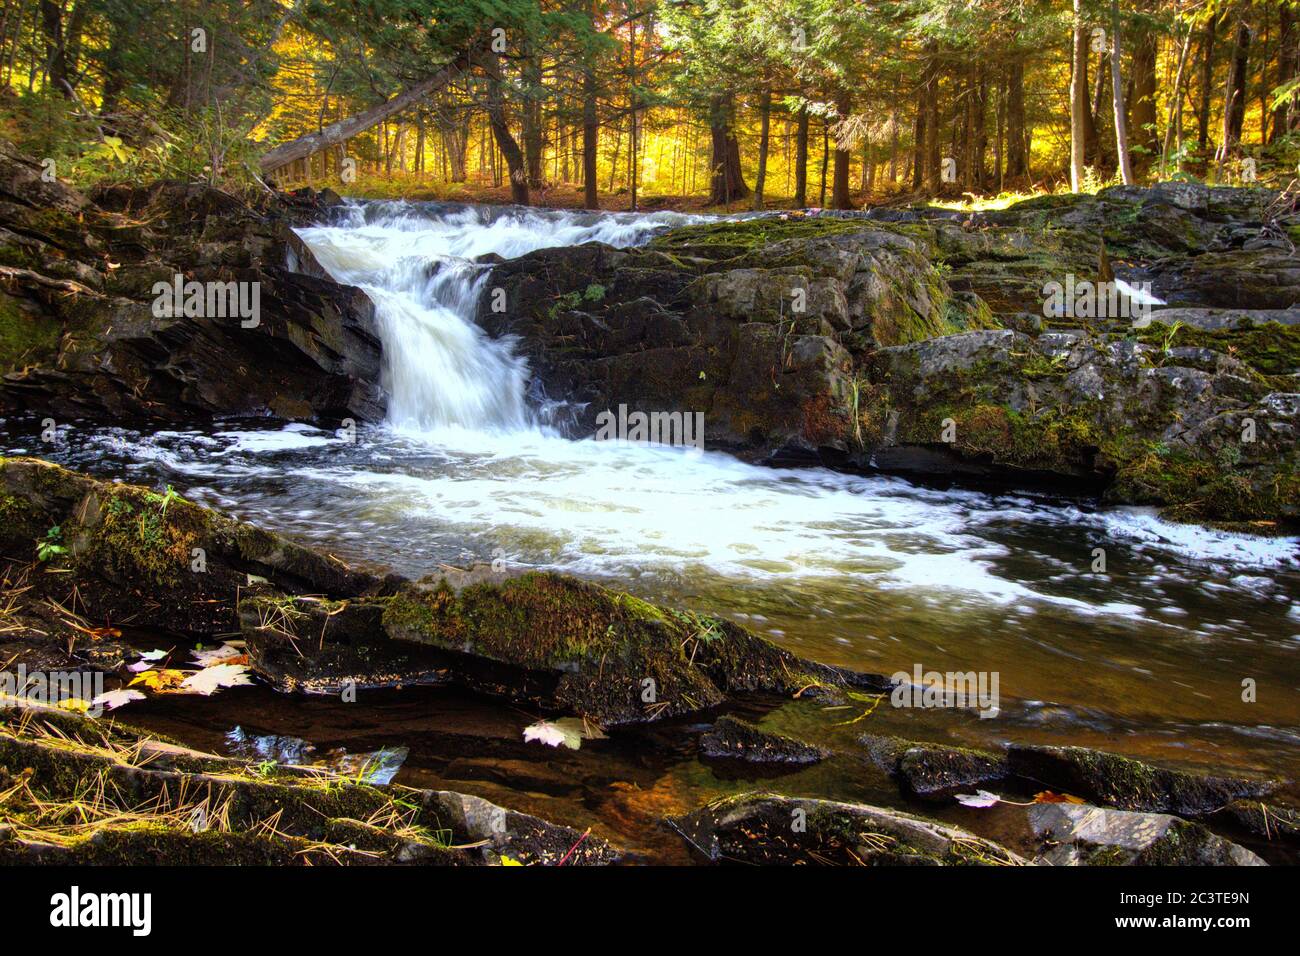 Autumn waterfall with fall foliage on the Falls River in the small town of L'Anse in the Upper Peninsula of Michigan. Stock Photo